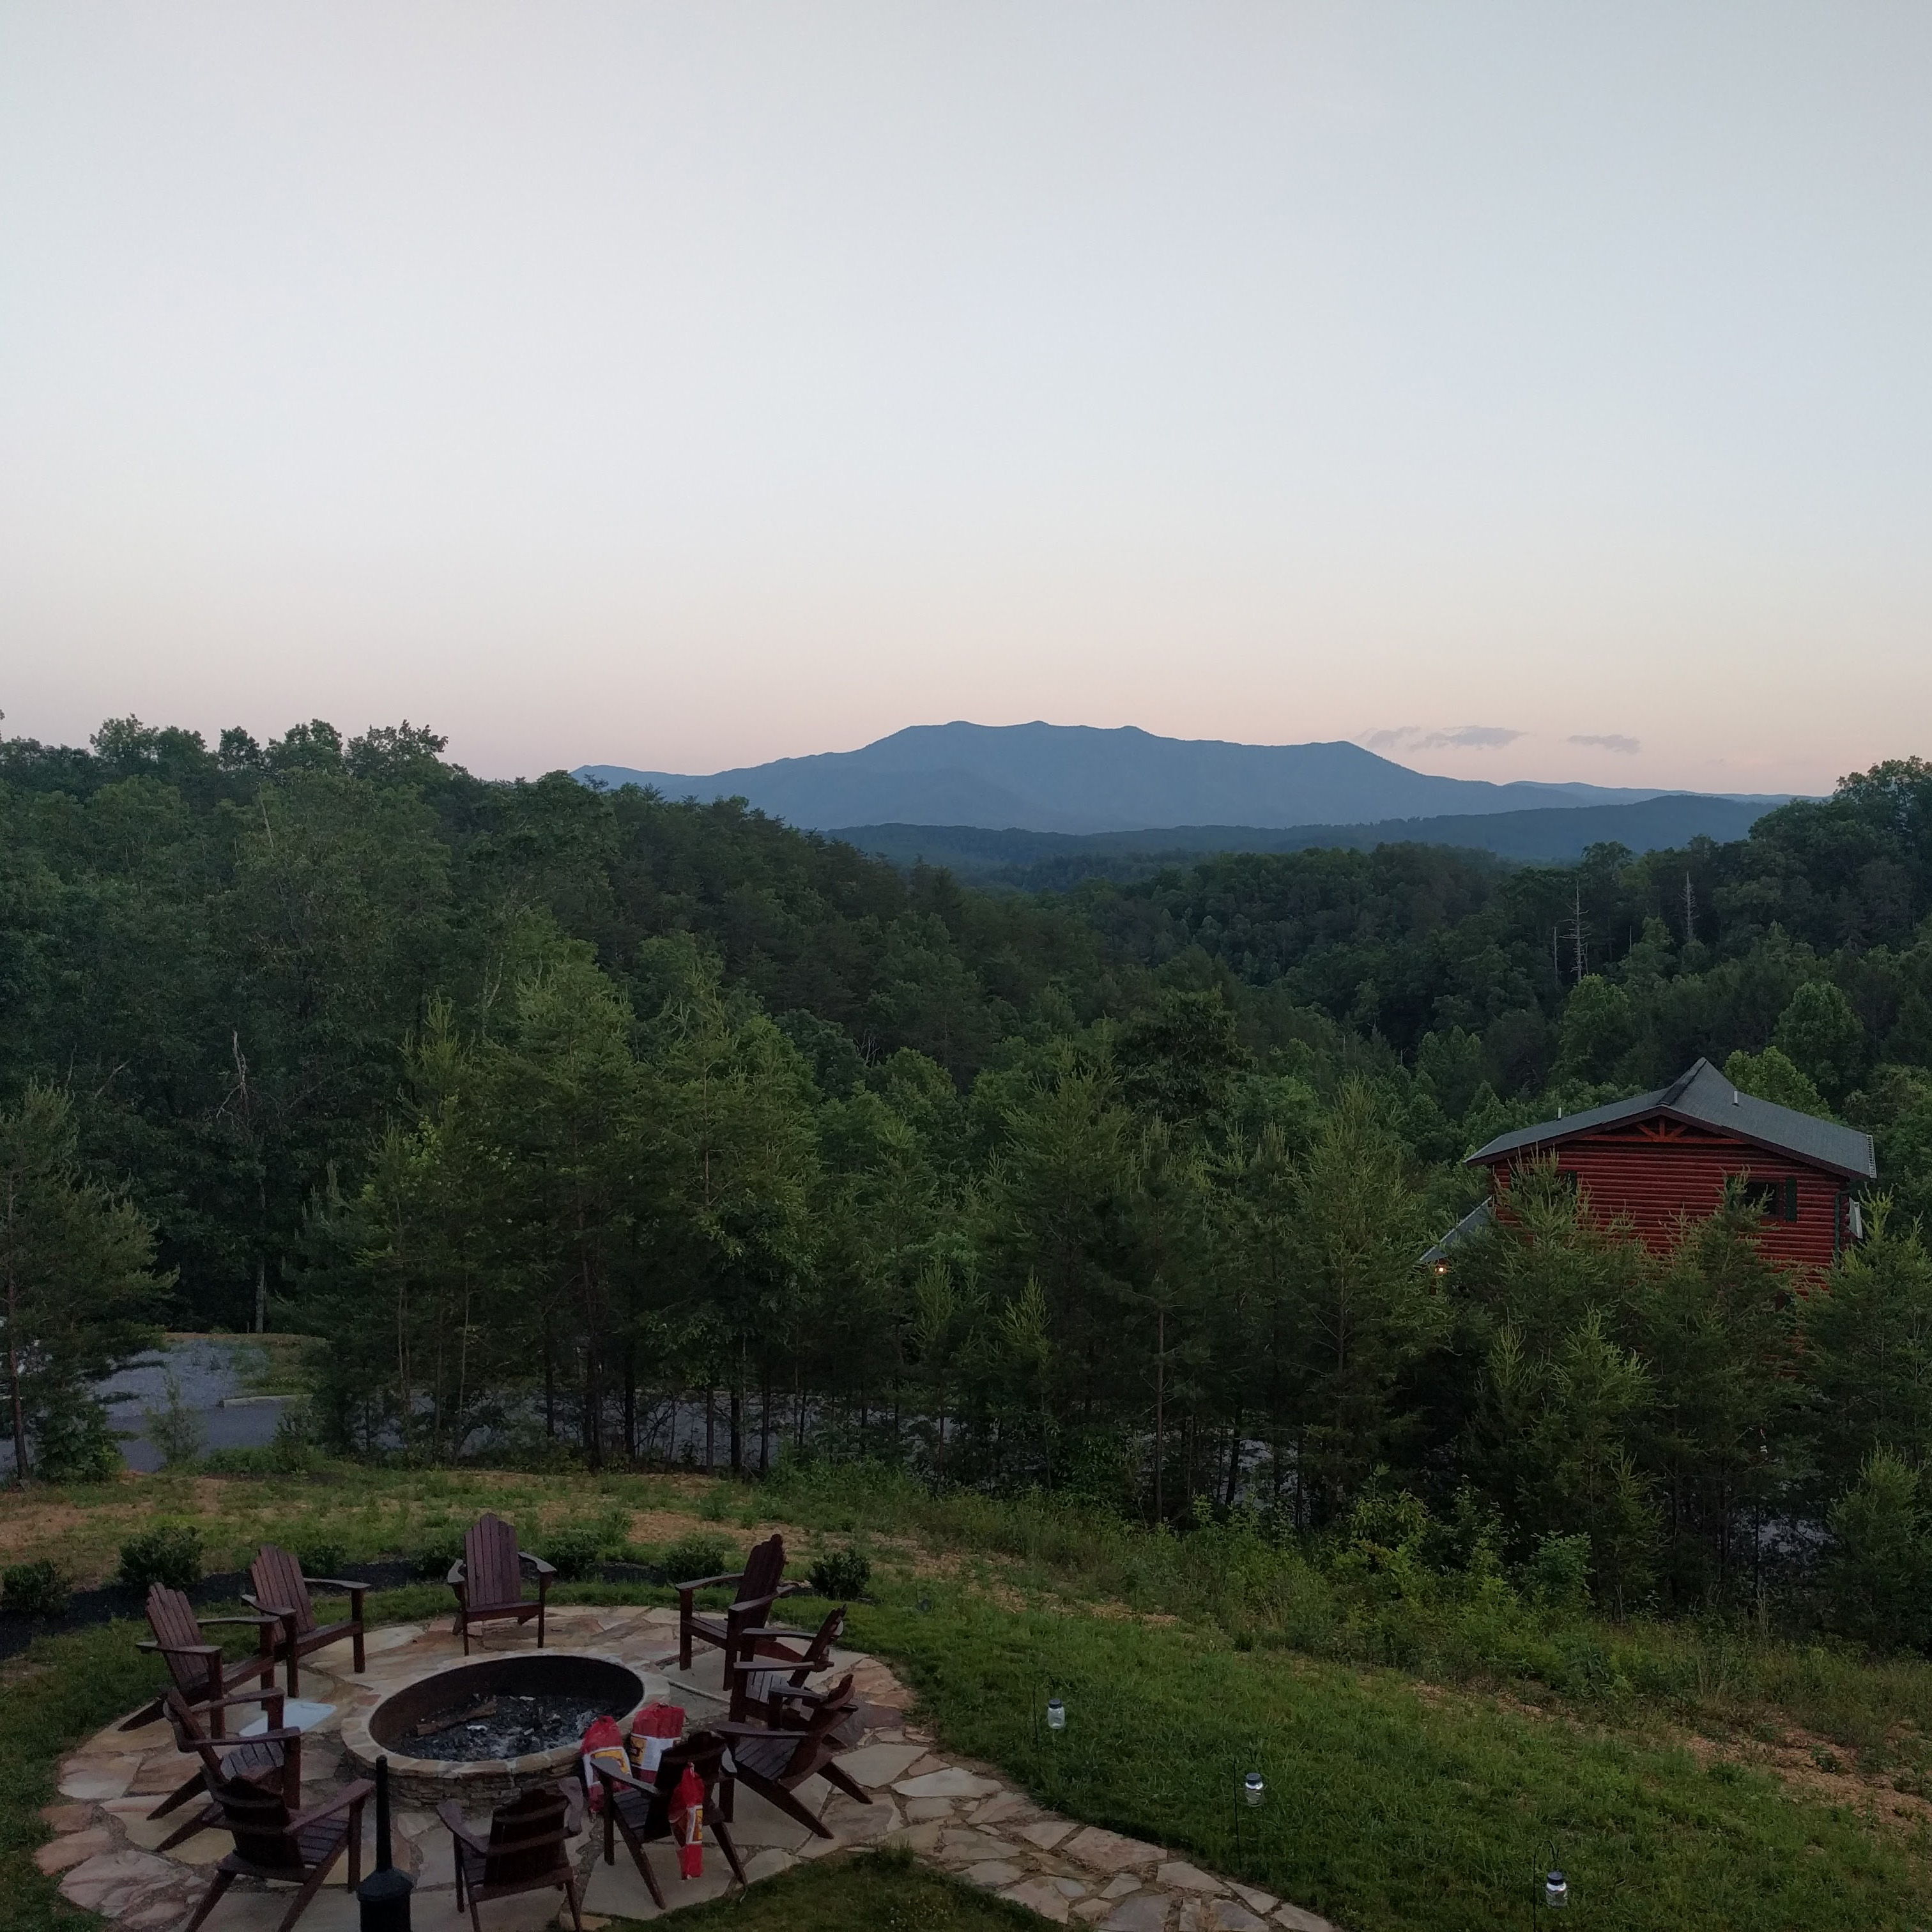 Looking out over the Smokey Mountains, Tennessee 2019